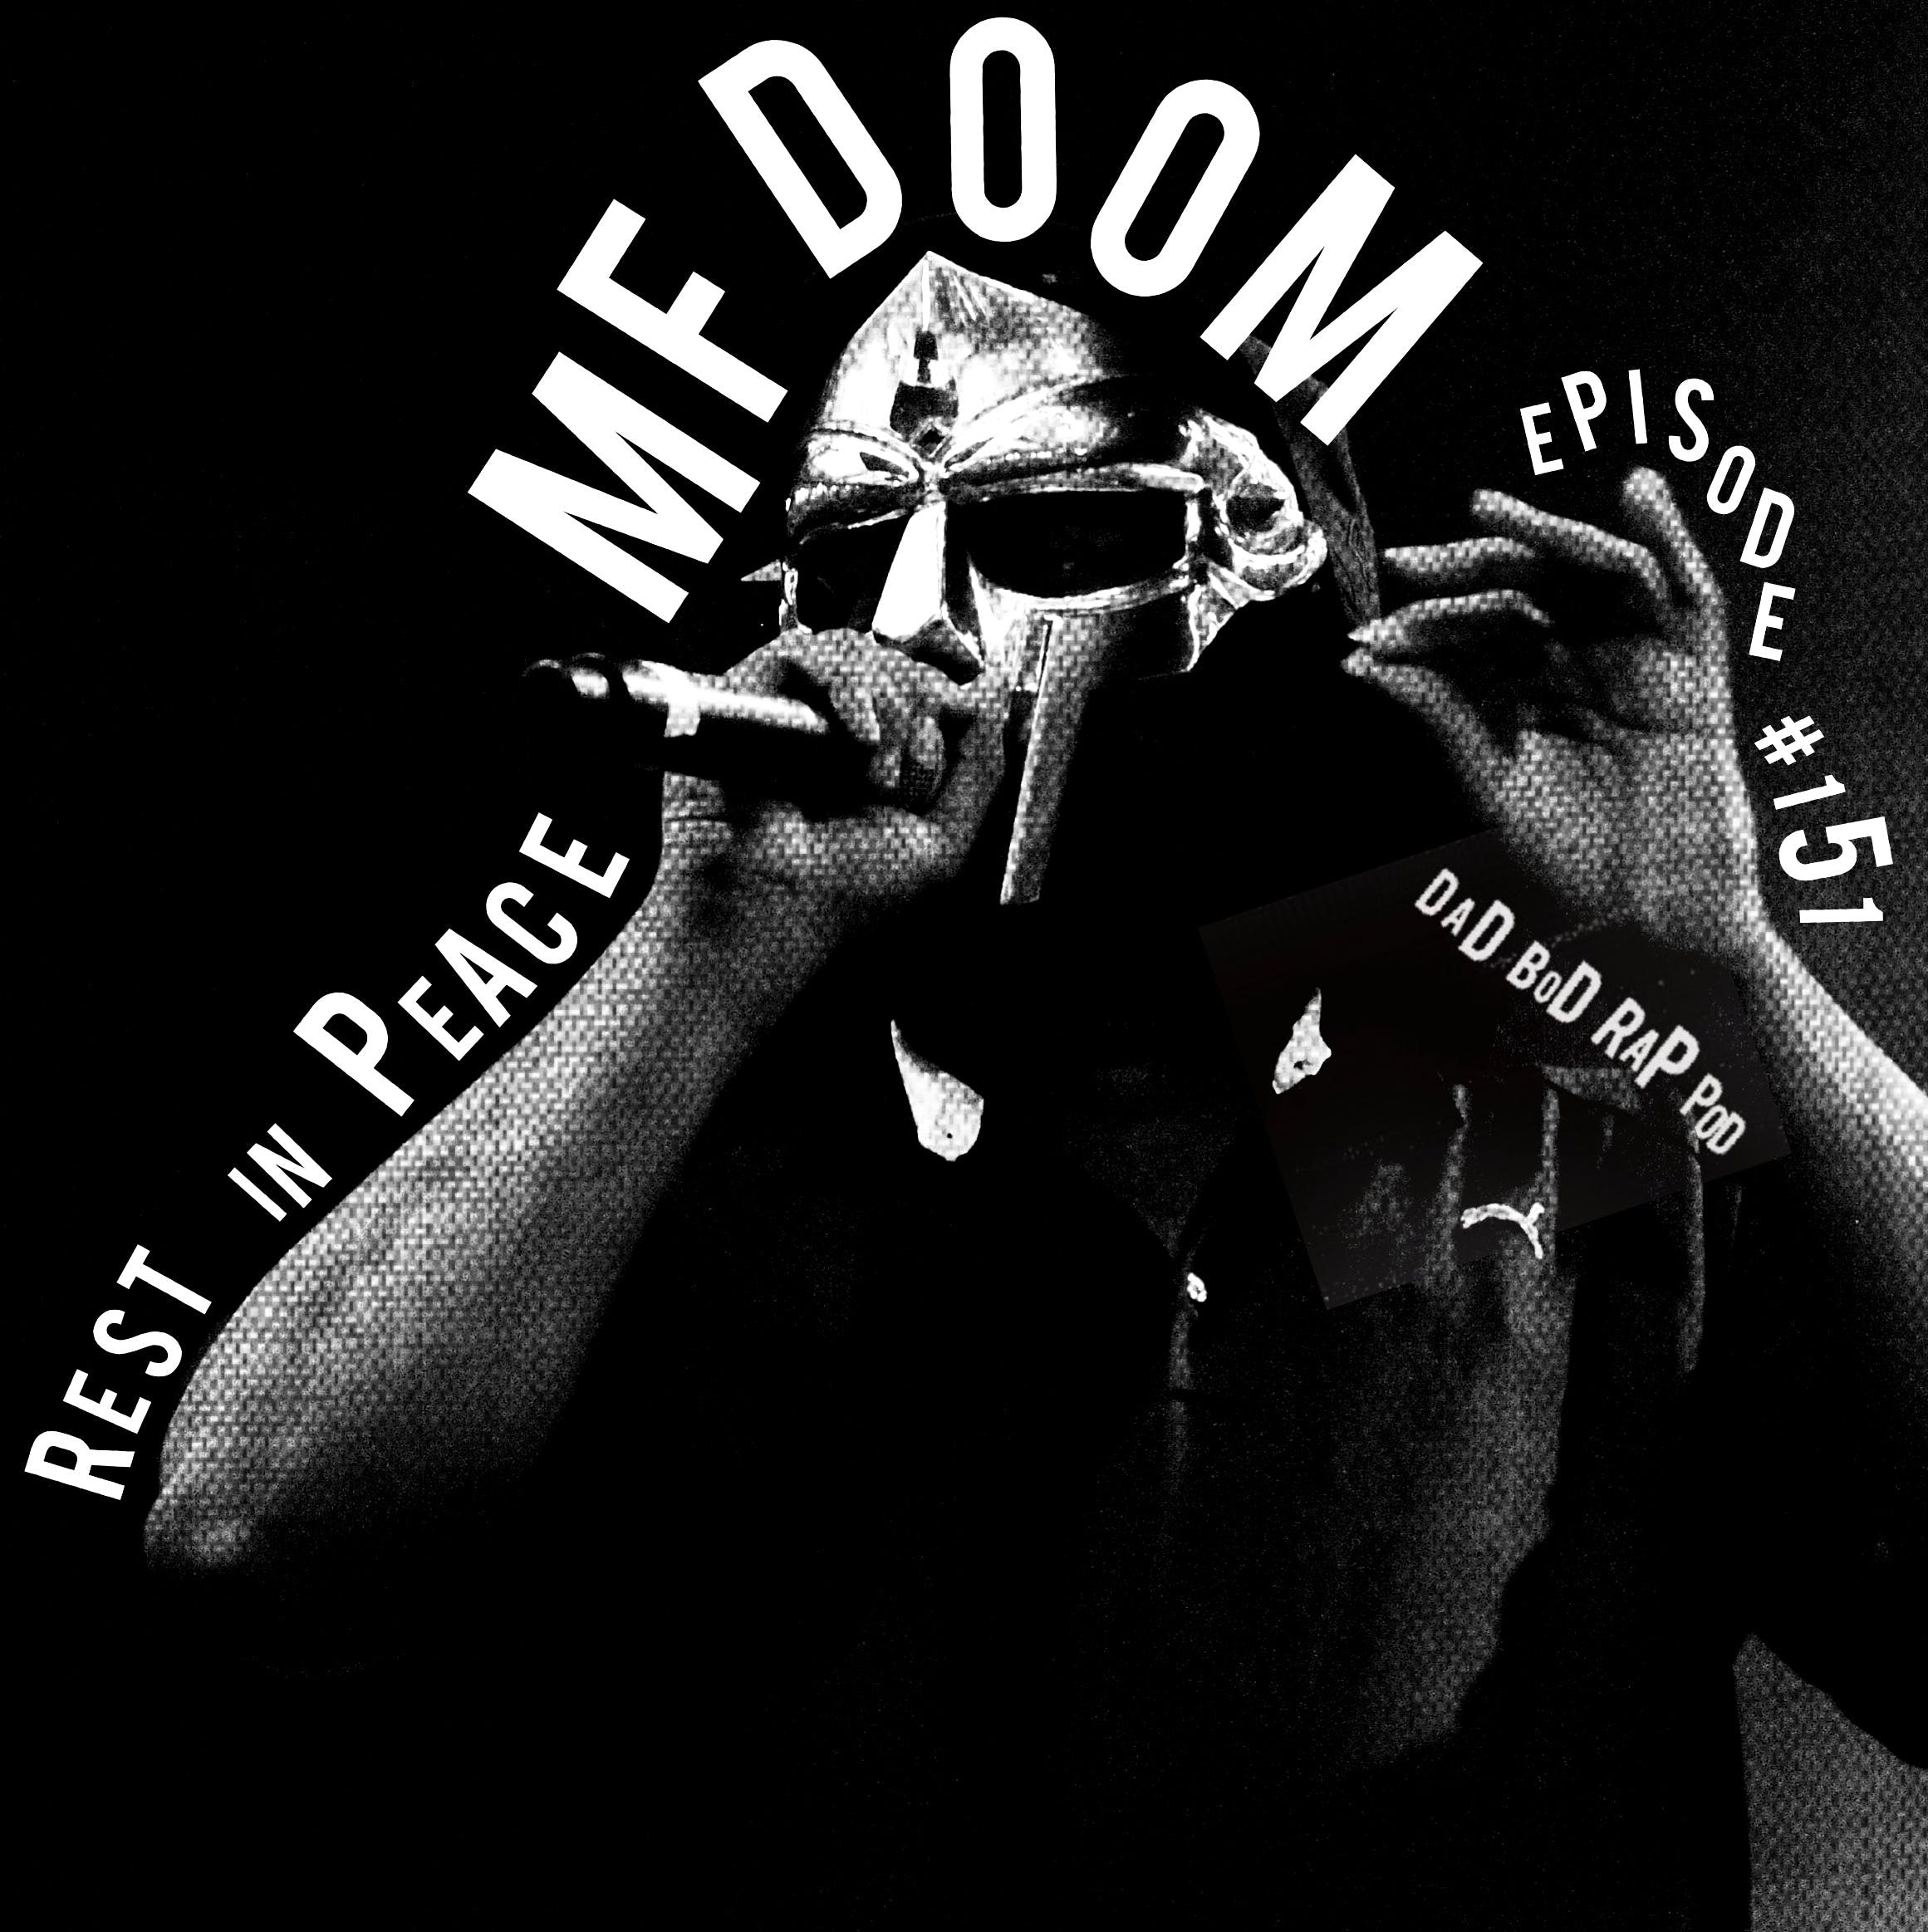 Episode 151- MF DOOM Memorial with guest Open Mike Eagle